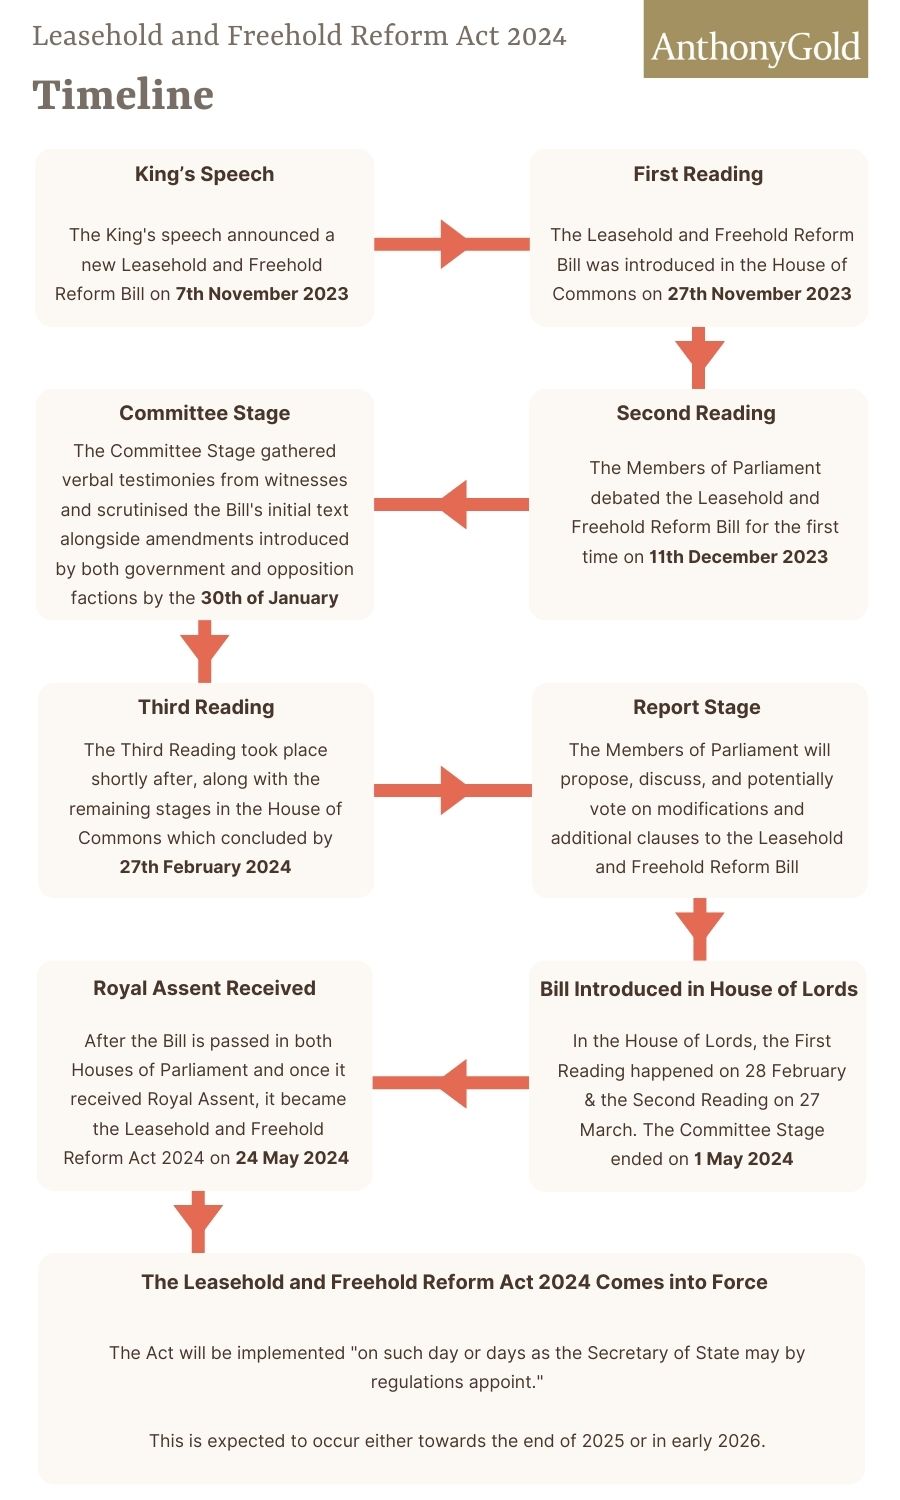 Leasehold and Freehold Reform Act 2024 timeline